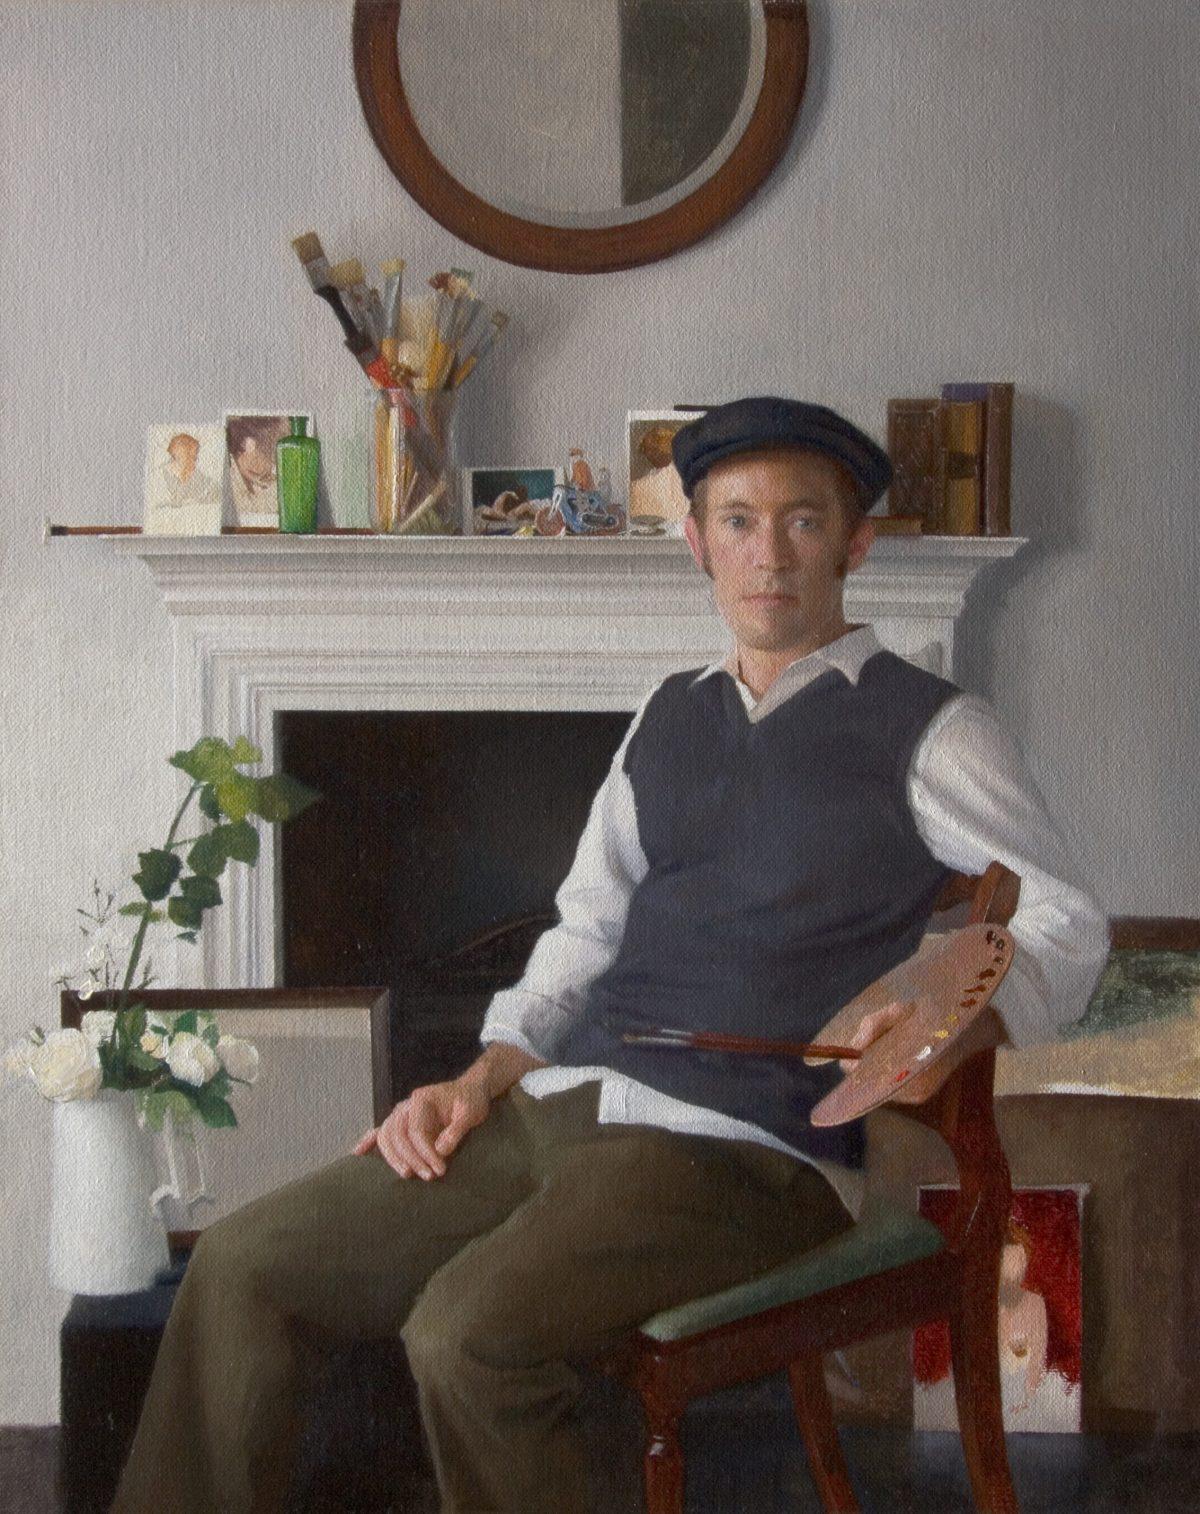 "The Portrait Painter," 2012, by Nancy Fletcher. Oil on wooden board, 16 inches by 12 inches, private collection. (Courtesy of Barnes Atelier of Art)